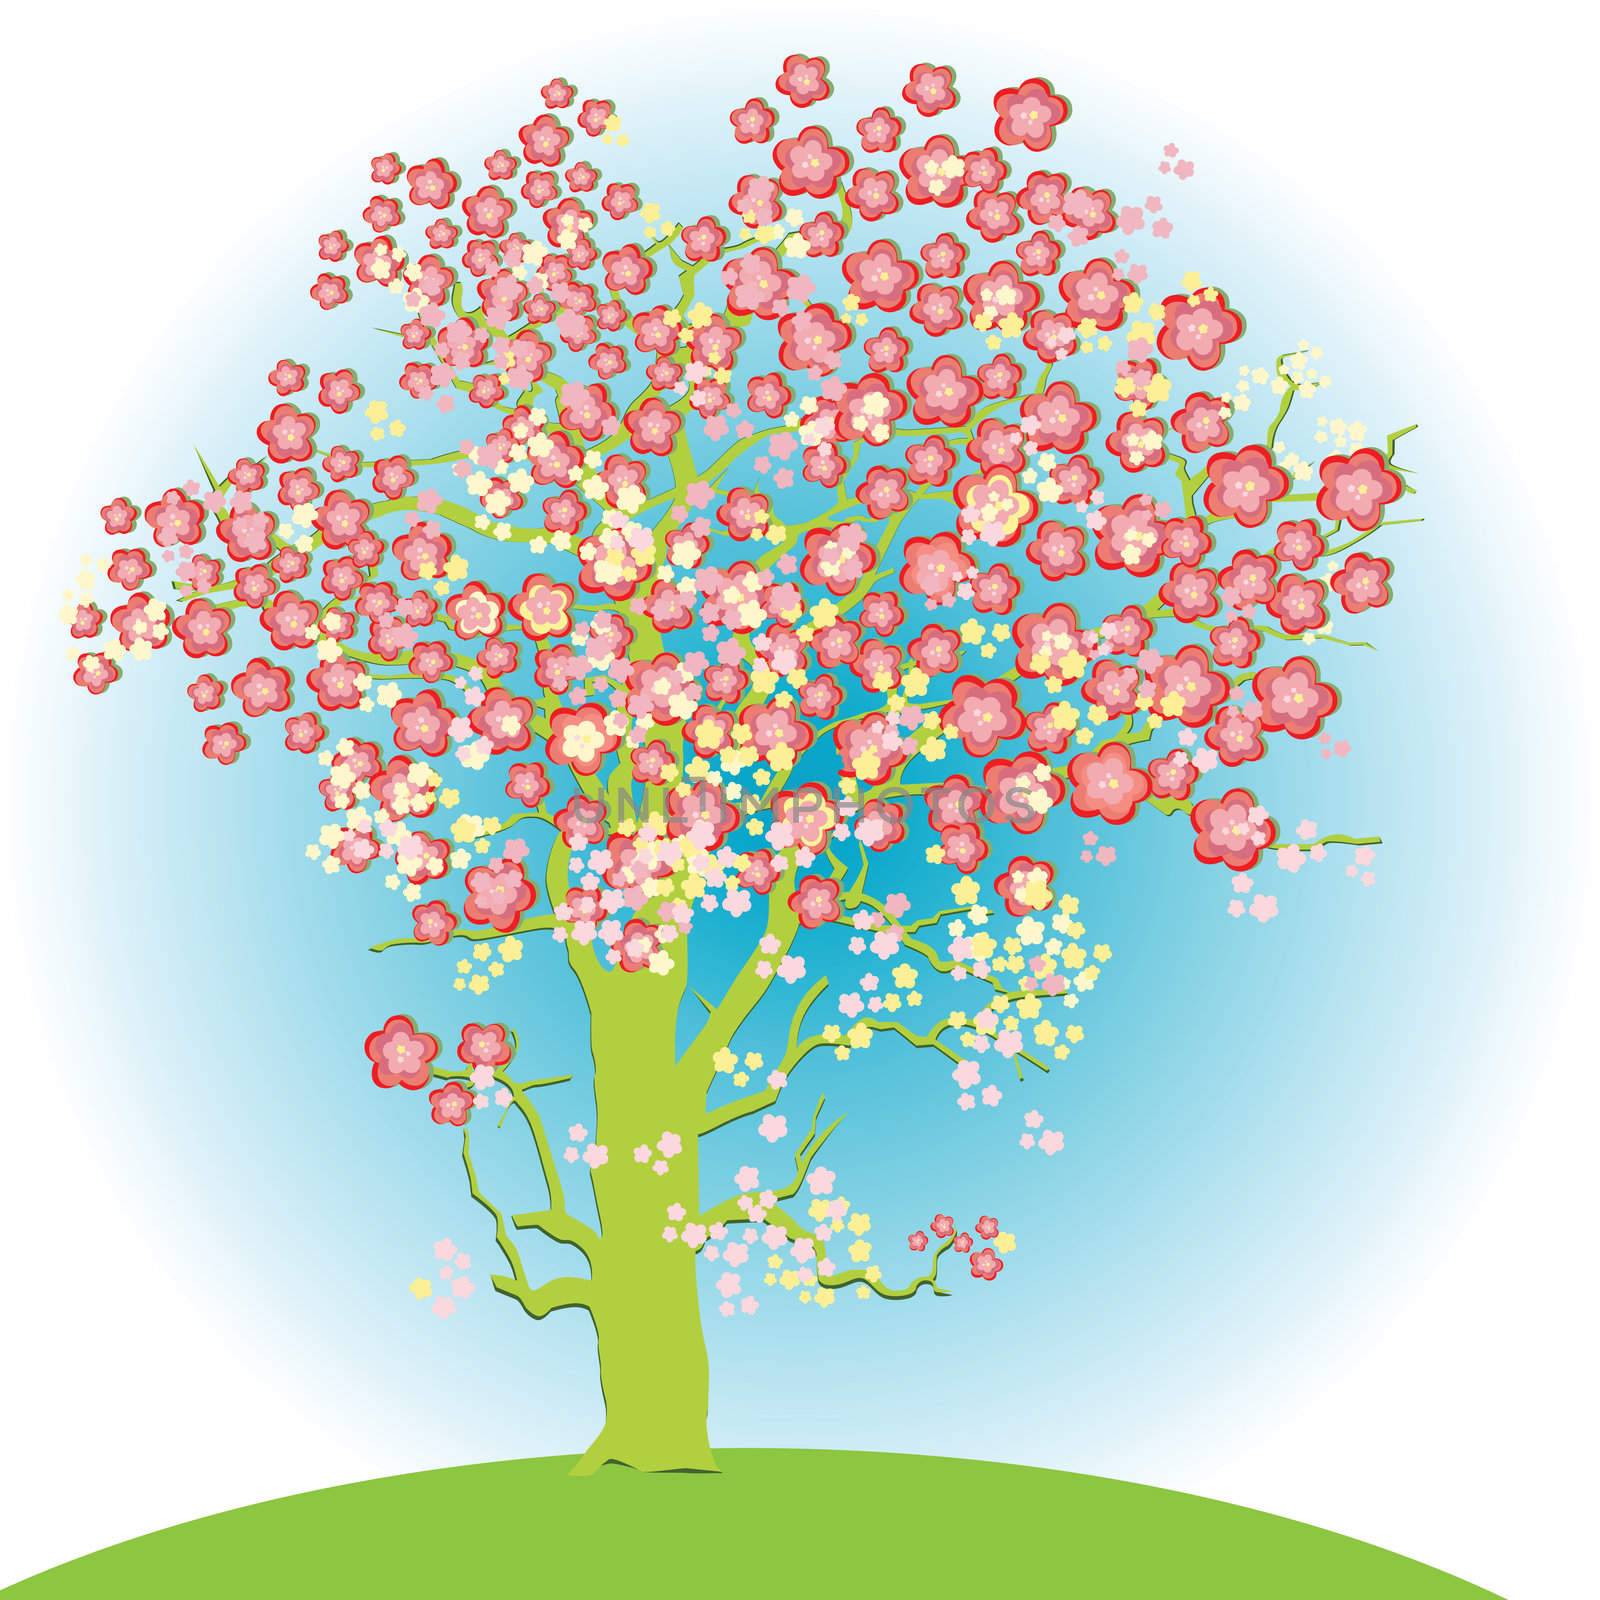 abstract spring tree full of flowers on a blue sky background